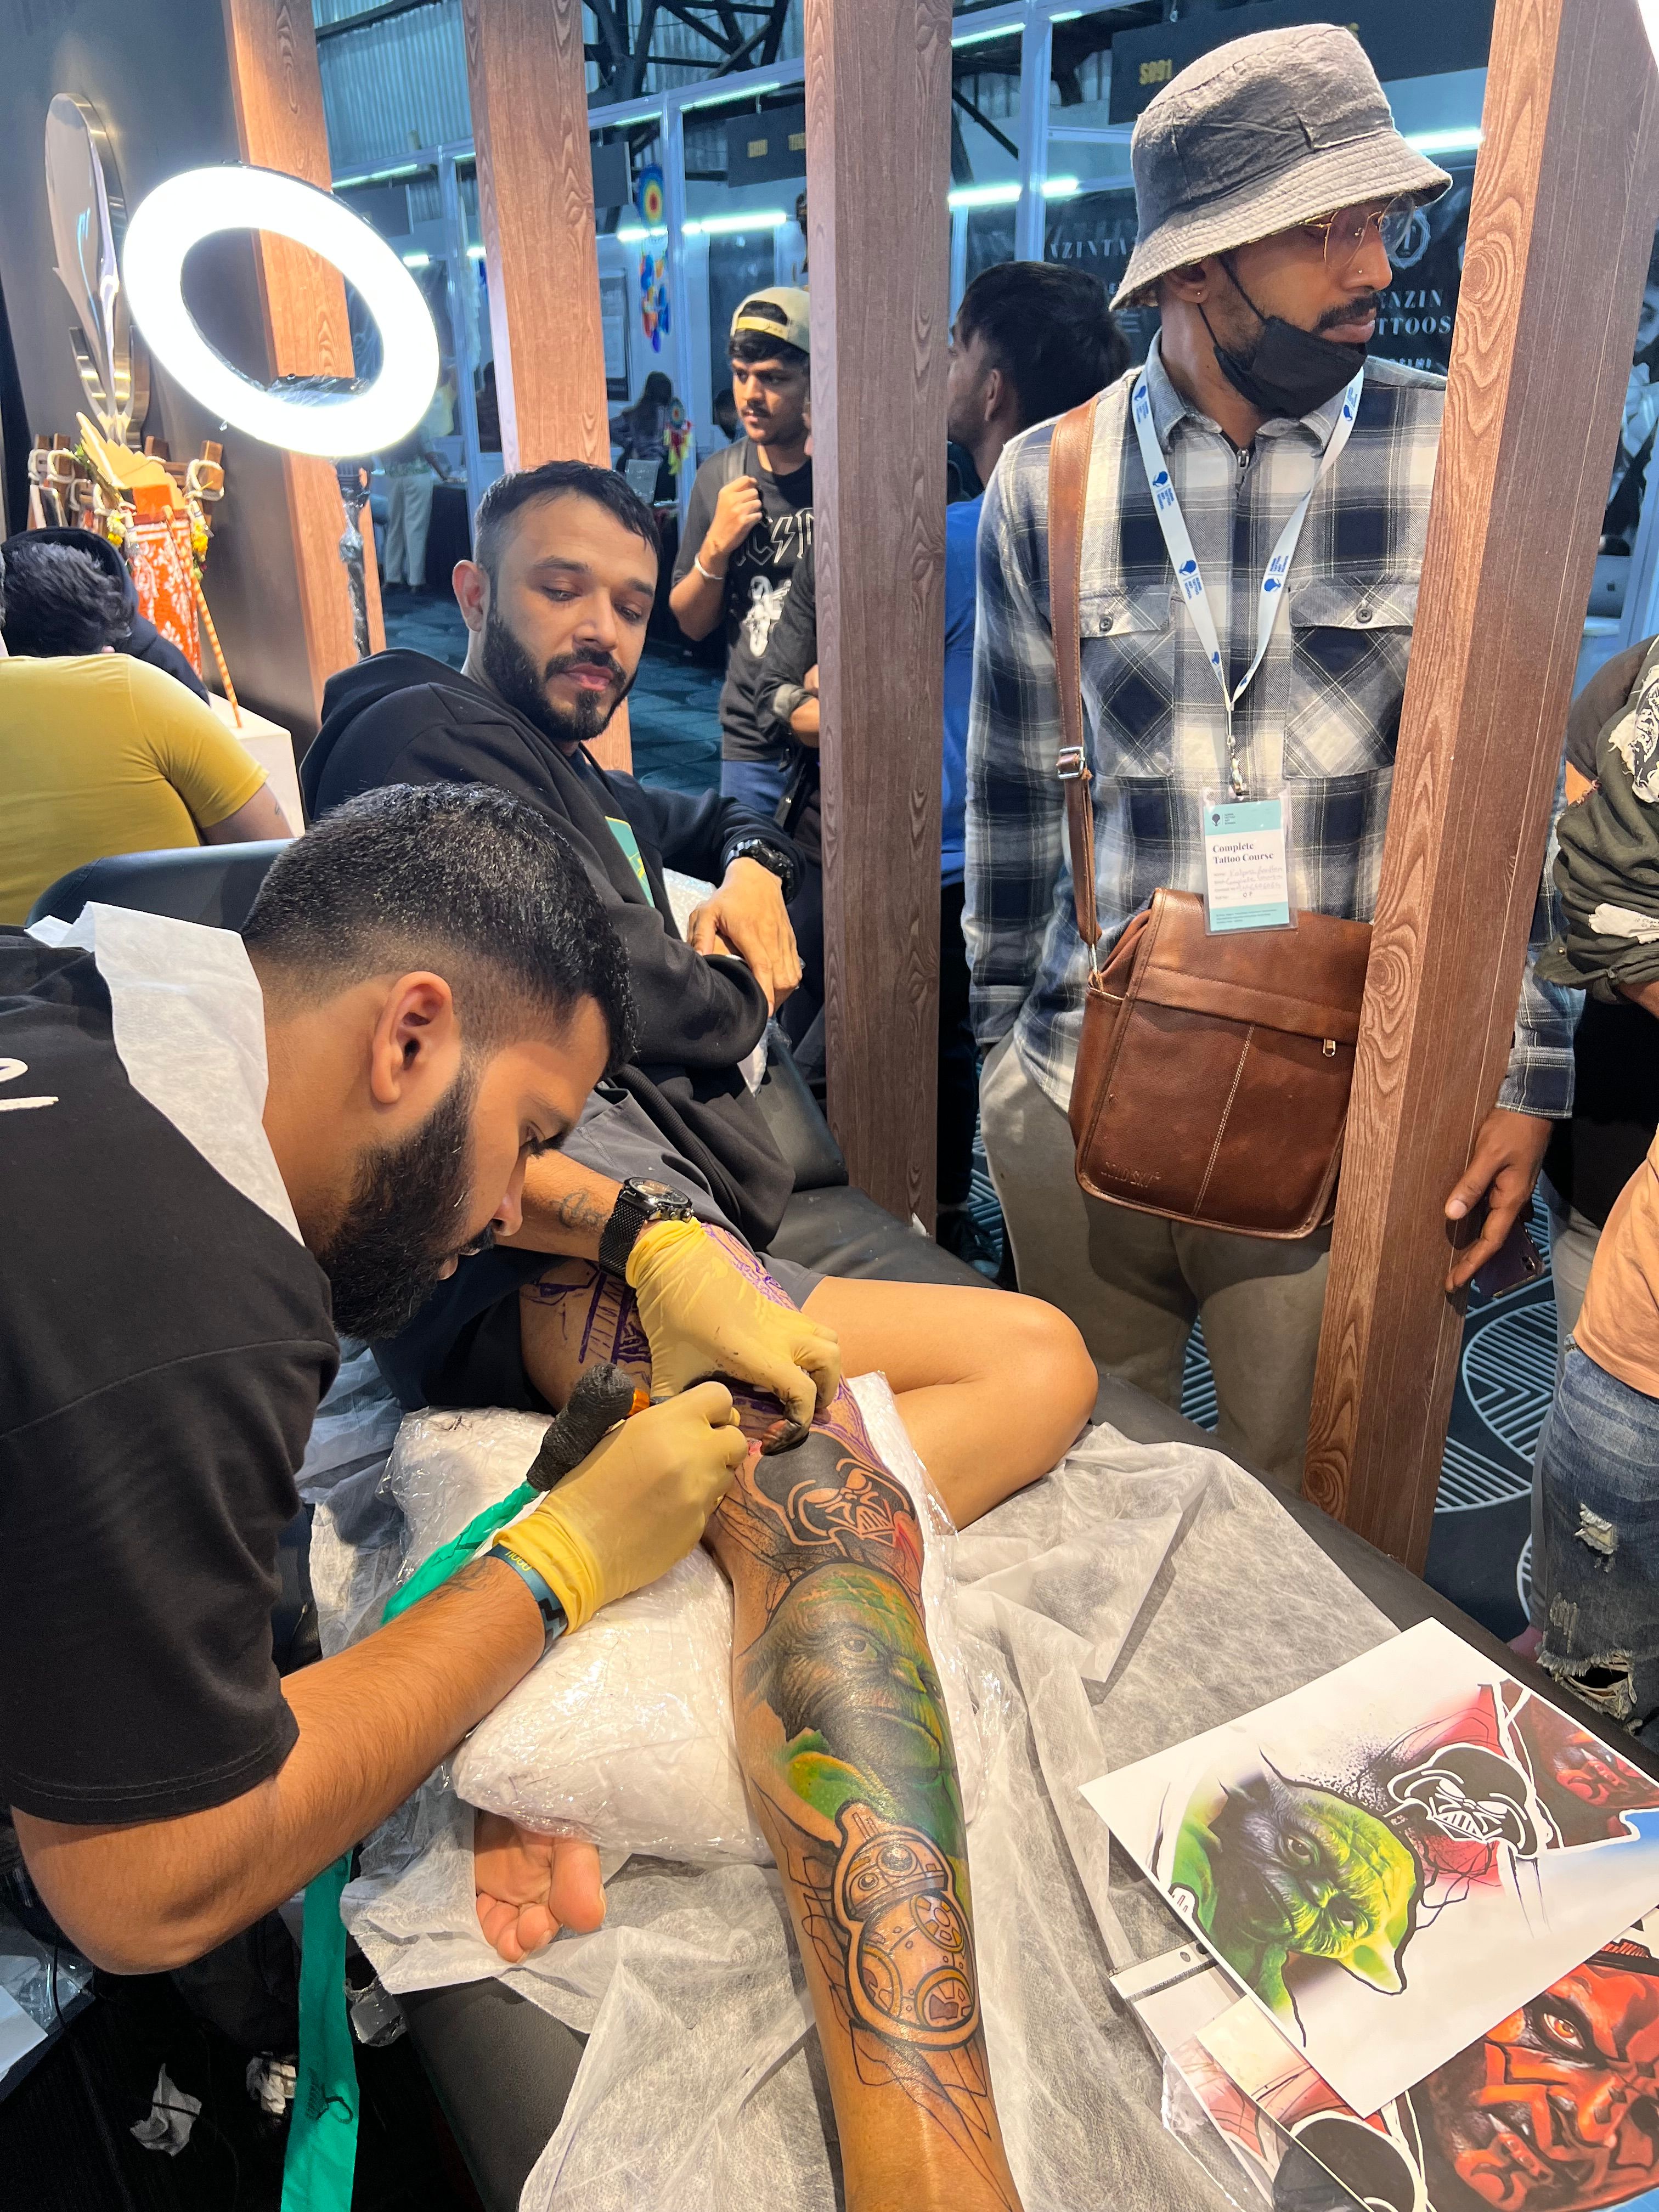 Black Canvas Tattoo Studio - The alien tattoo can mean whatever you want it  to me to you as the wearer. You can get the alien tattoo to represent your  favorite sci-fi